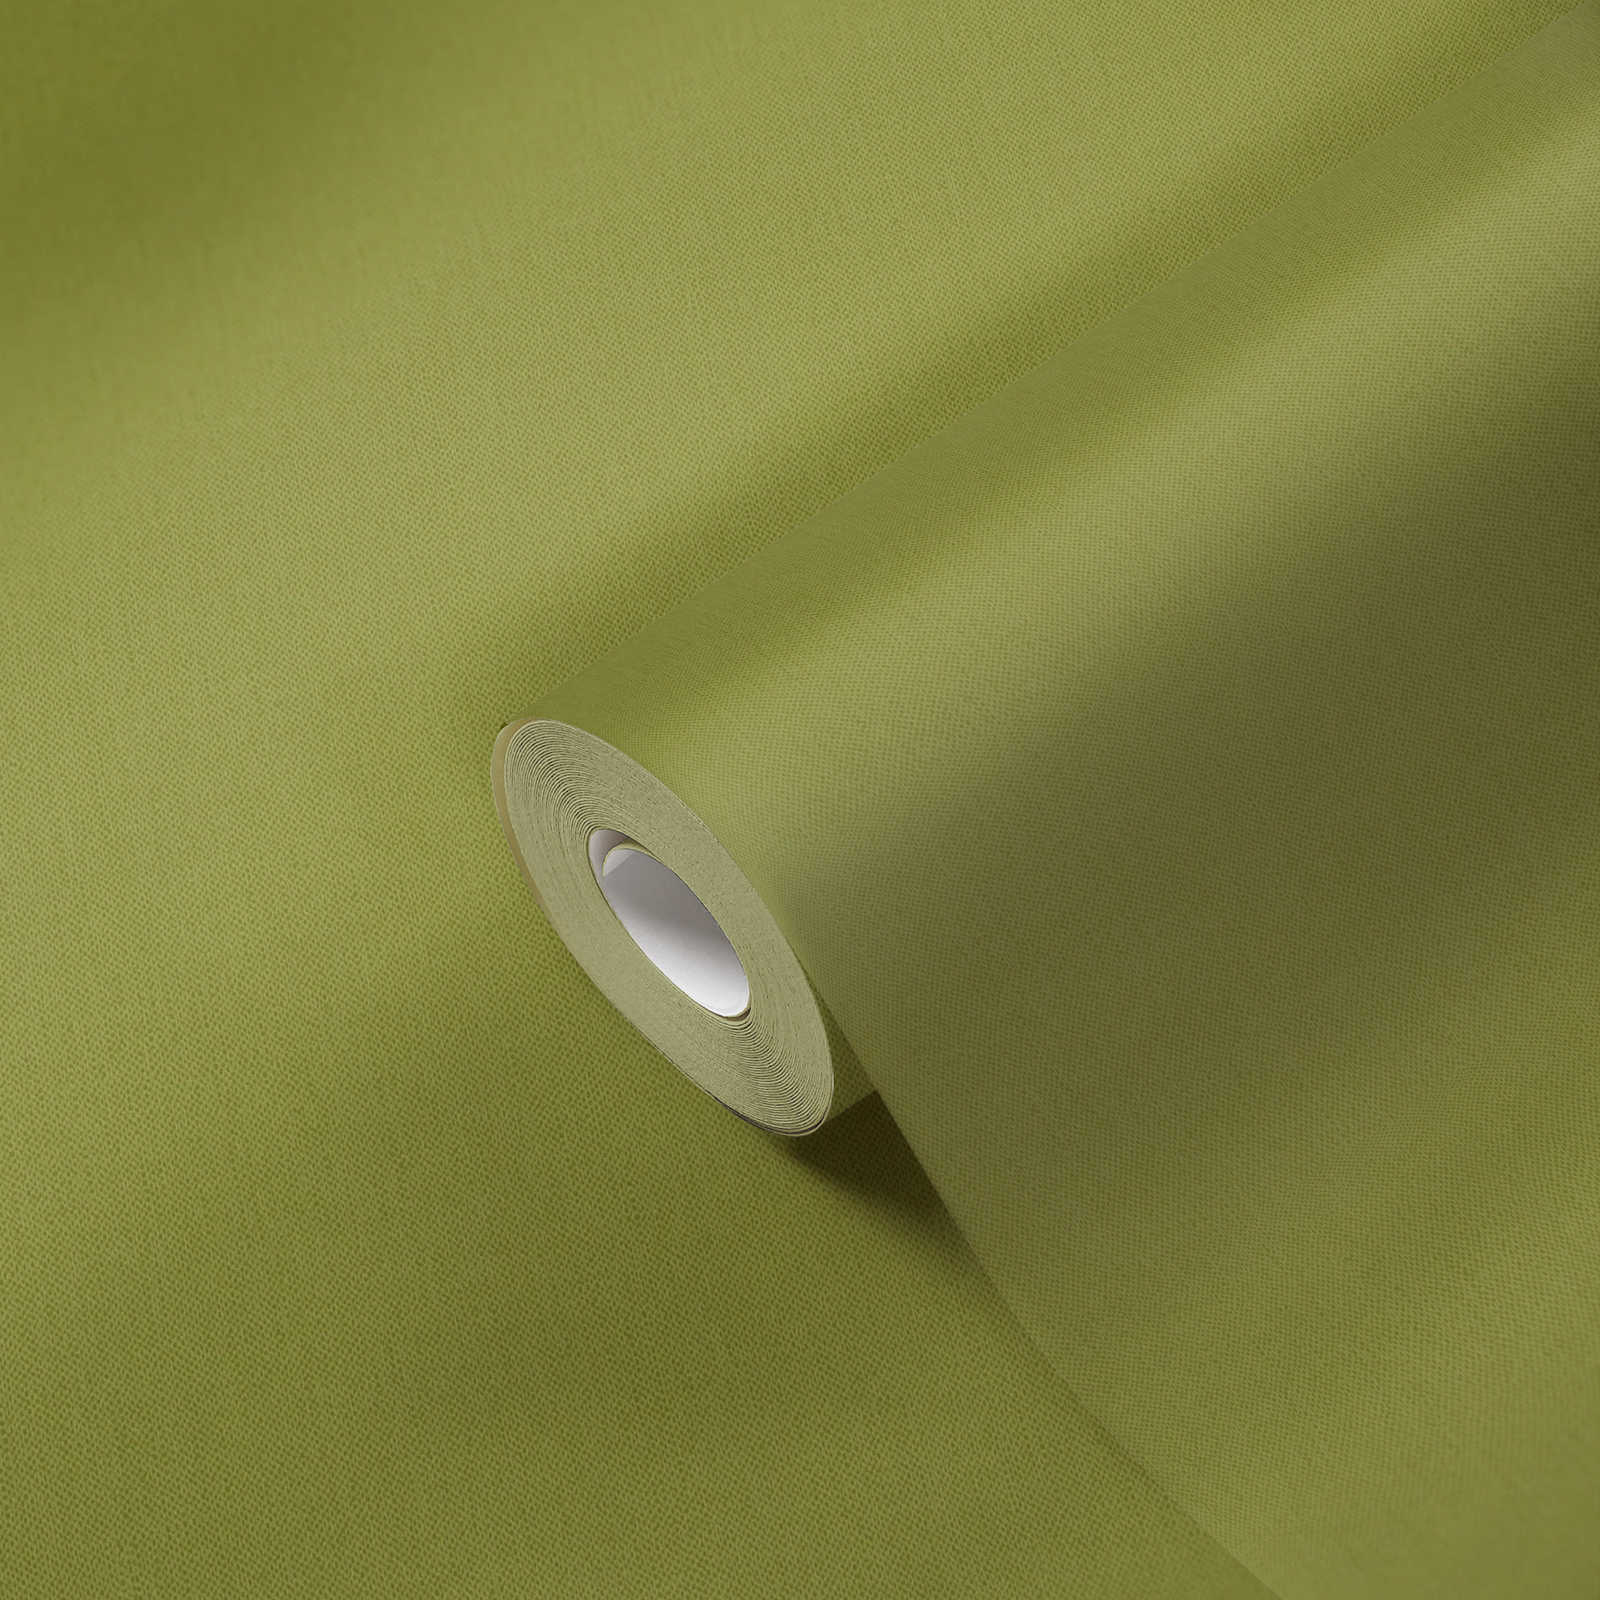             Wallpaper olive green with linen look & texture pattern - green, yellow
        